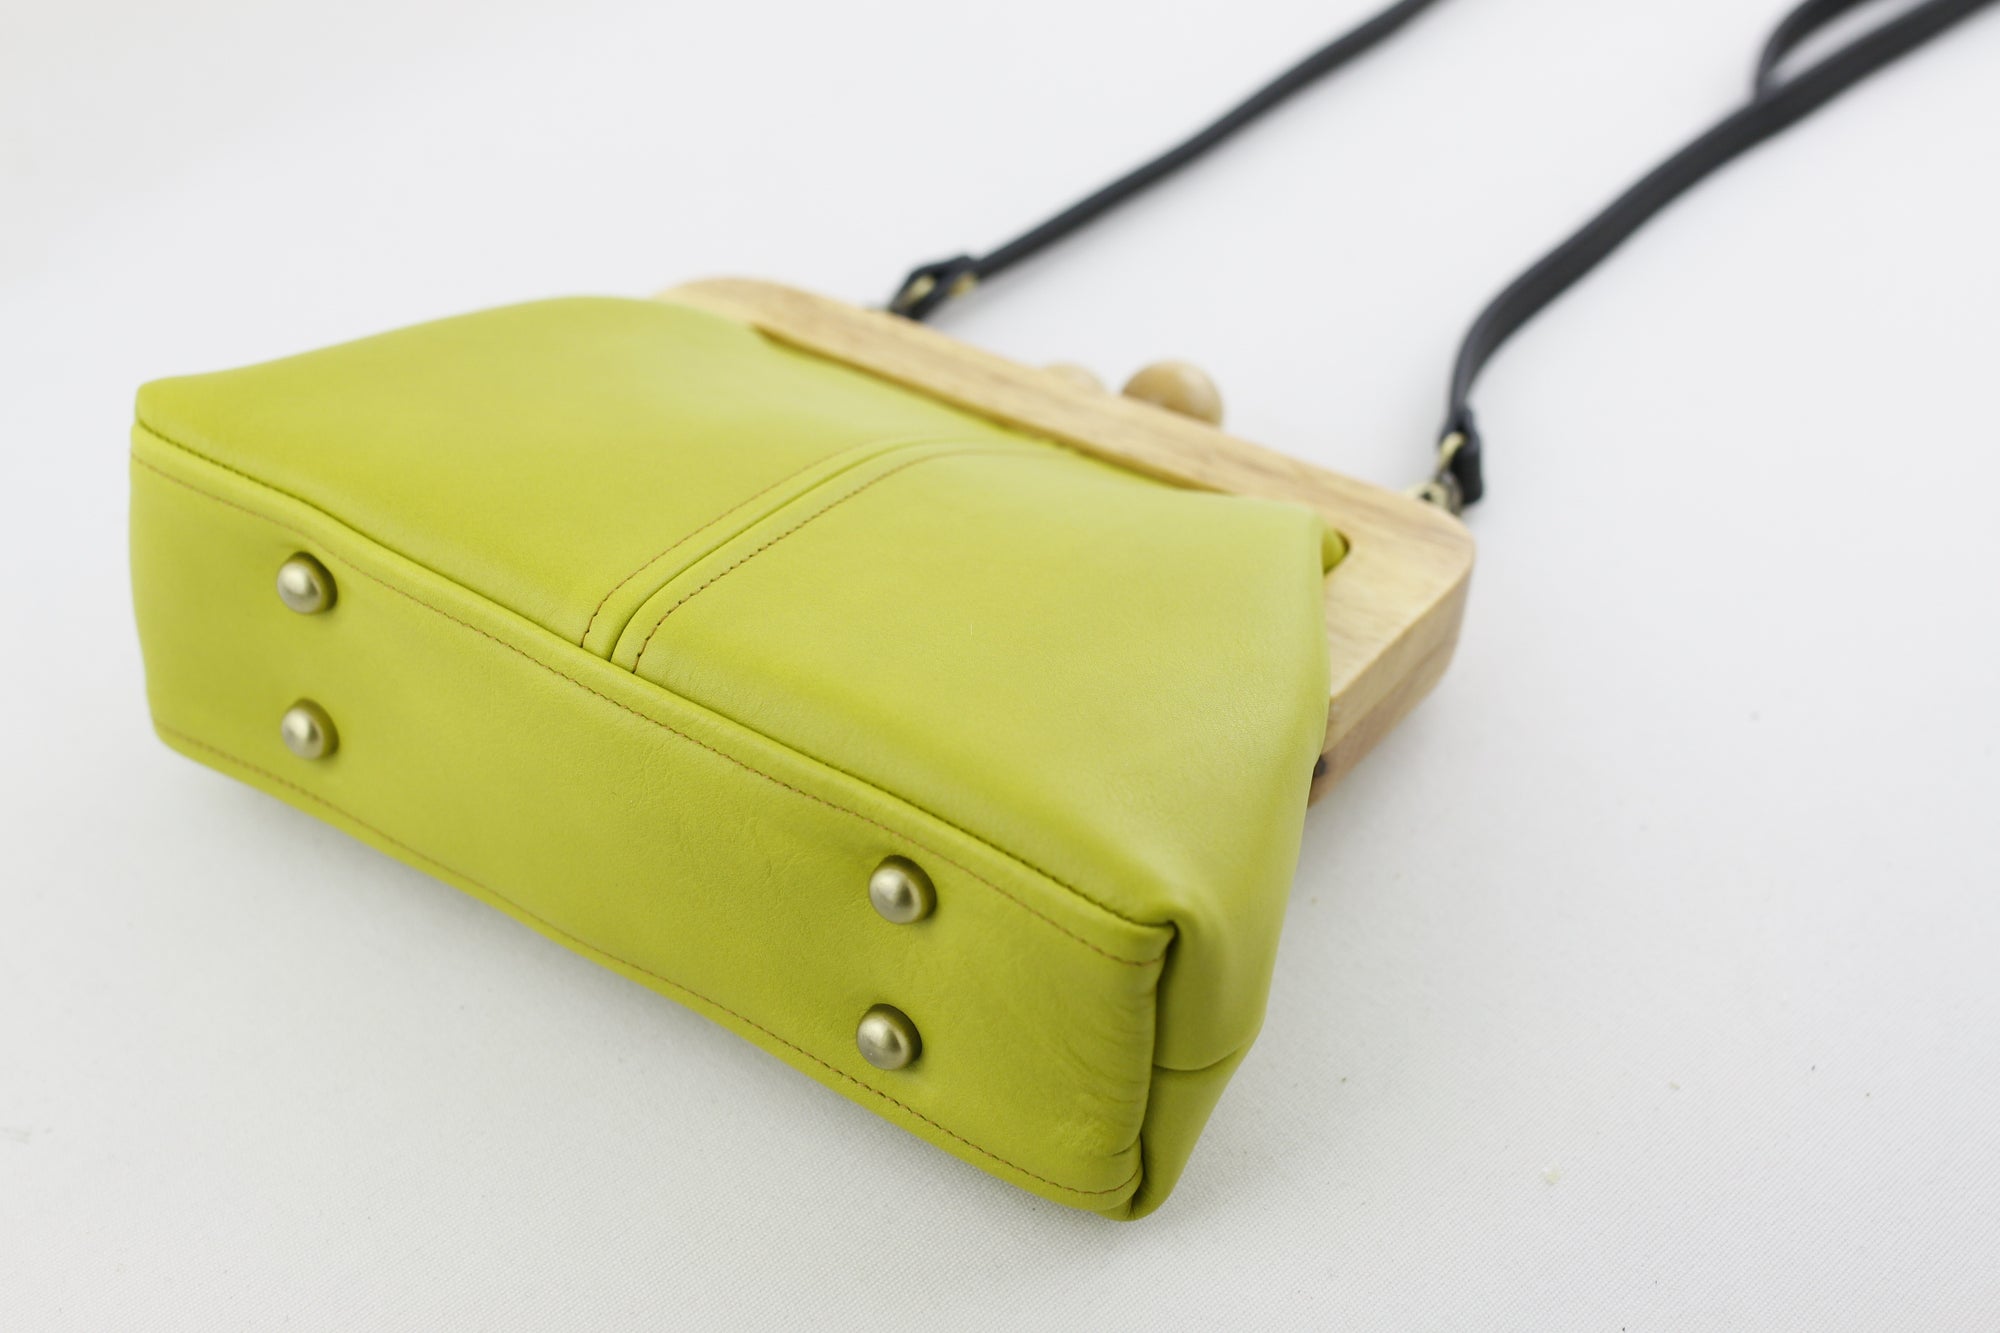 Women's Green Genuine Leather Clutch Bag with Strap | PINKOASIS